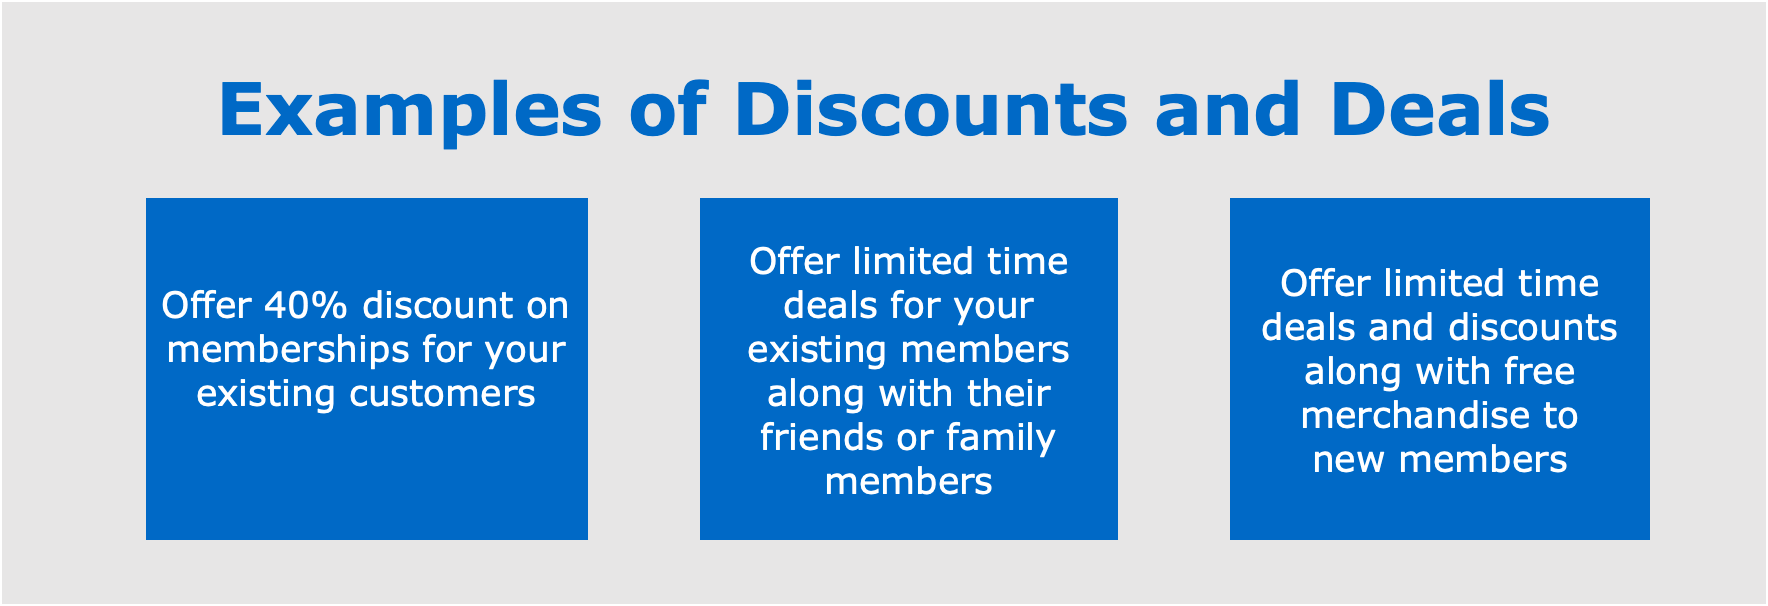 Examples of Discounts and Deals